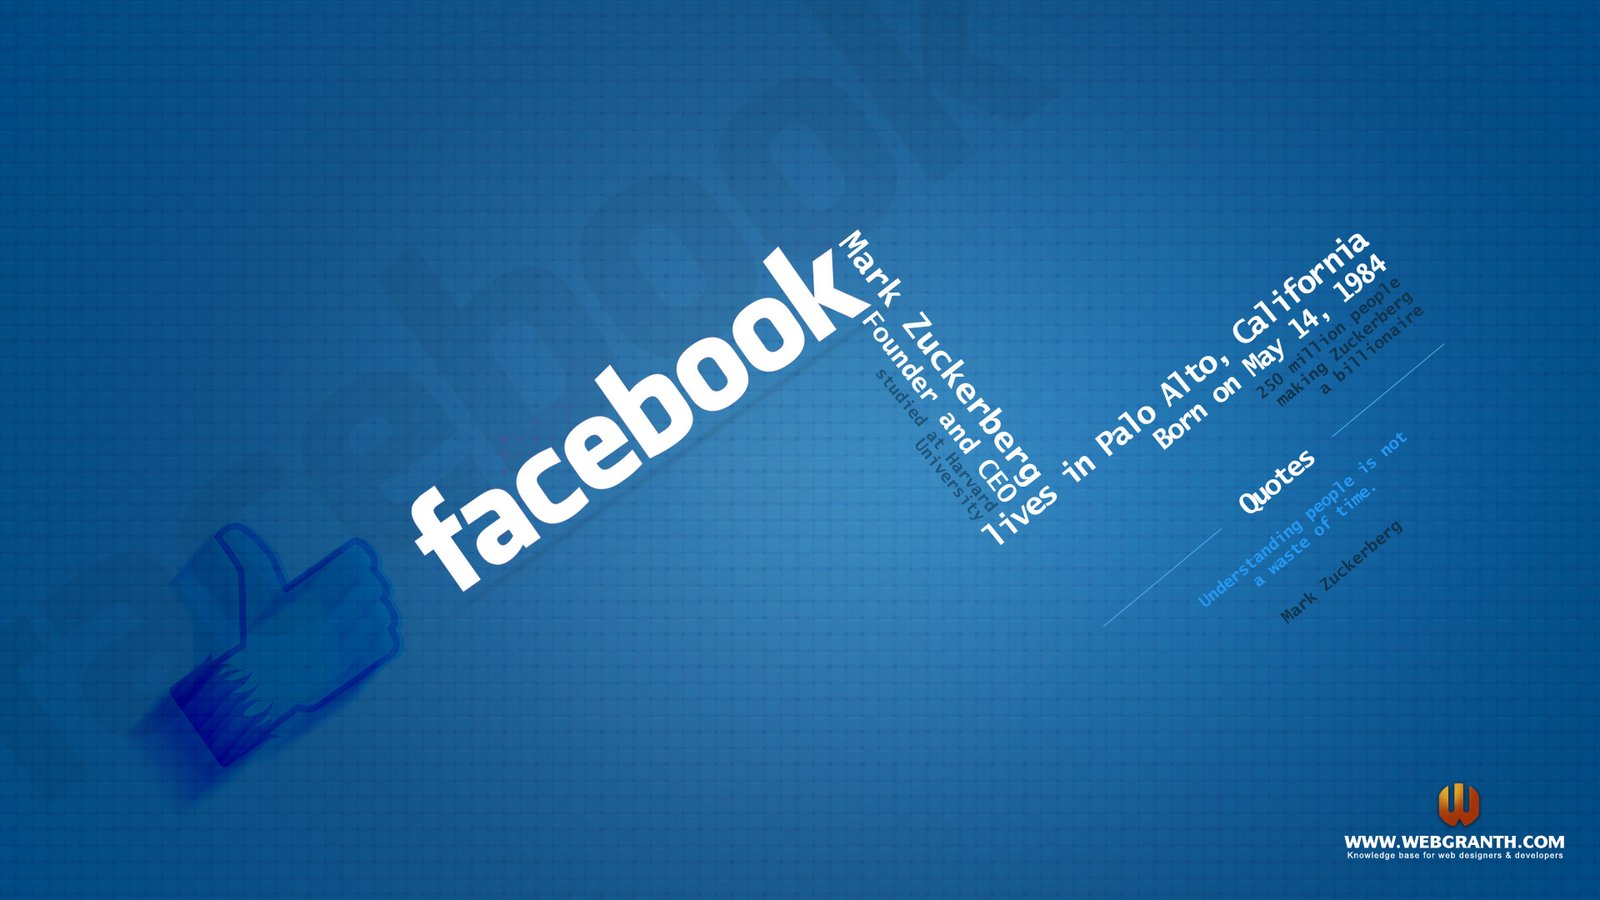 very beautiful wallpapers for facebook